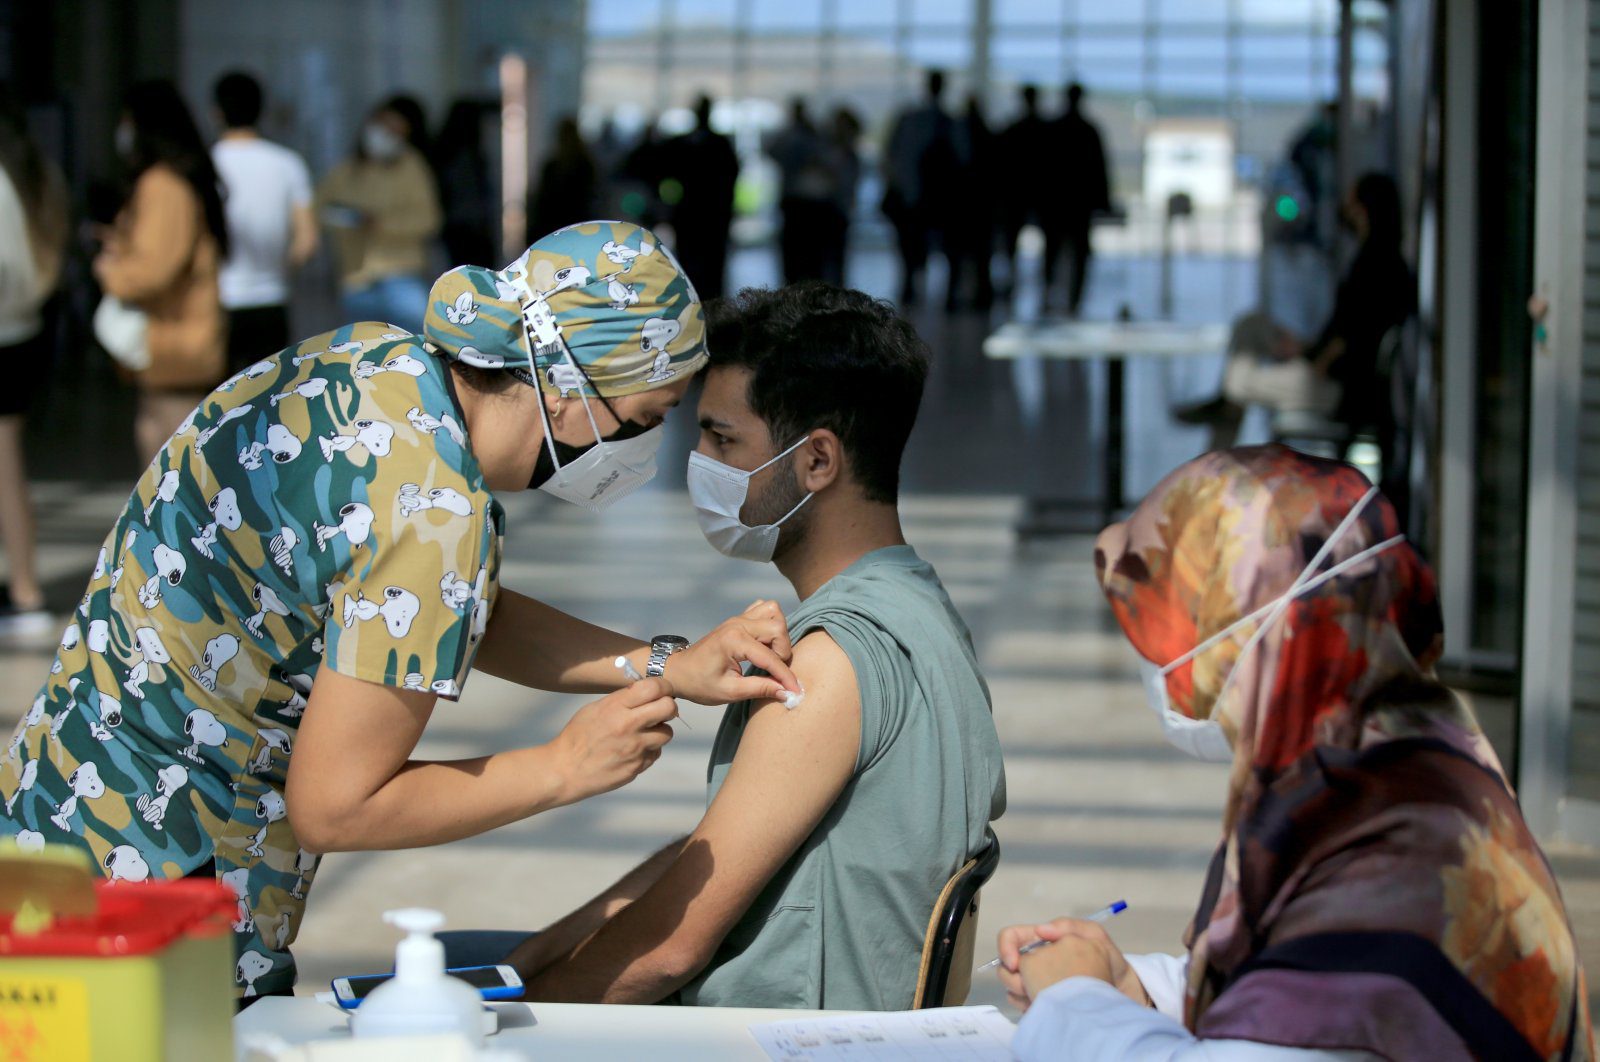 Turkey to consider booster shots for people vaccinated with two doses of Pfizer-BioNTech